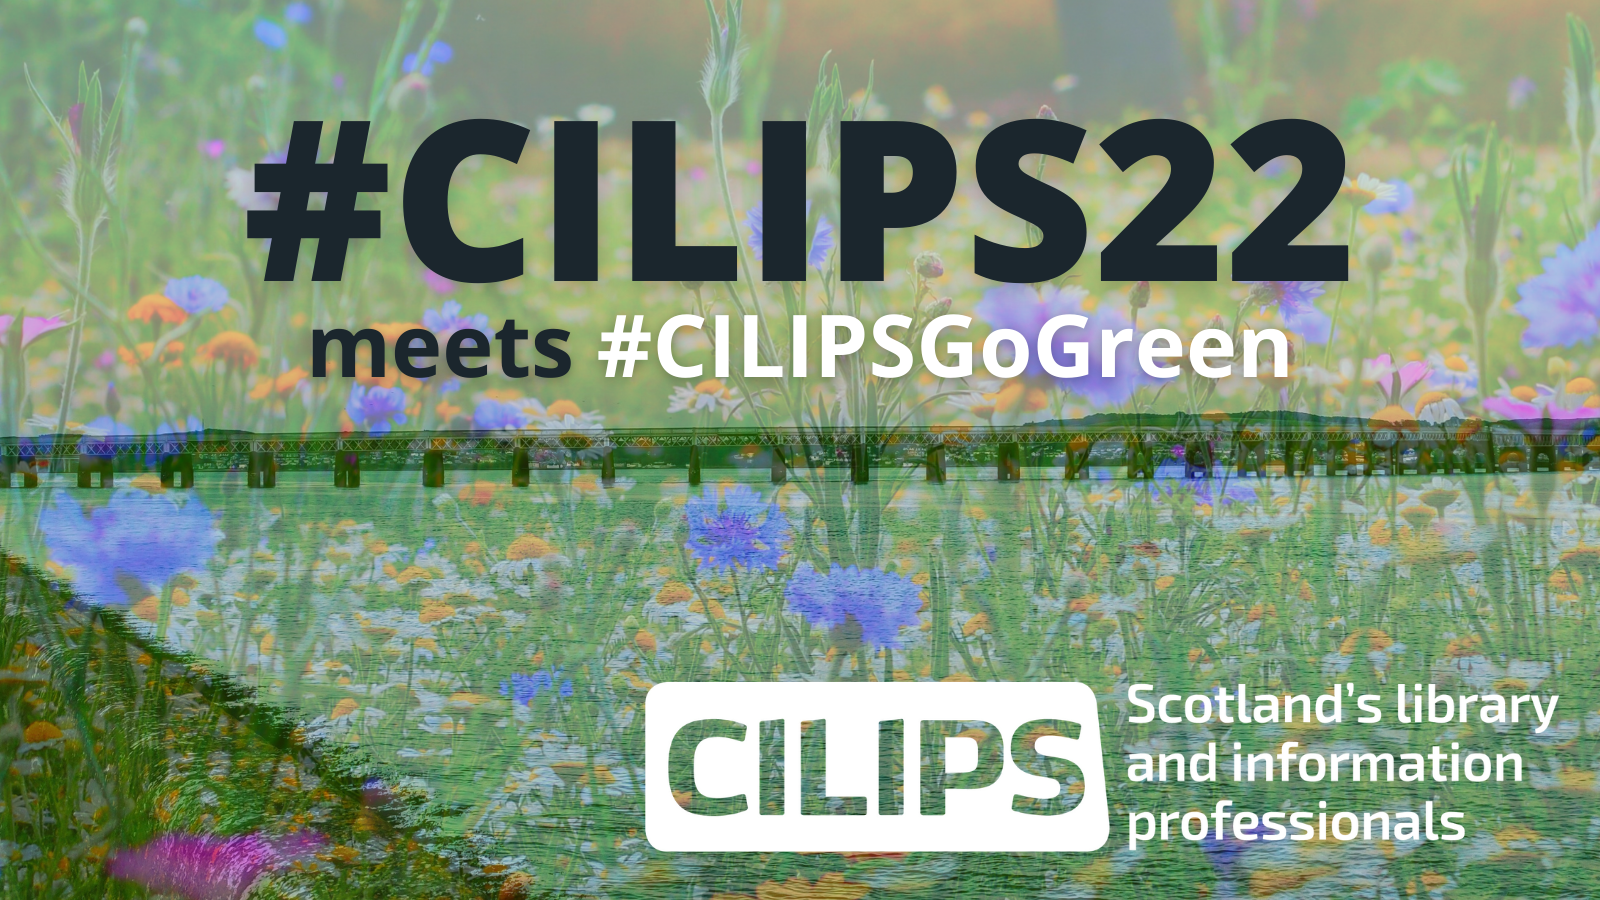 The CILIPS22 logo, showing the Dundee waterfront, overlaid with the CILIPSGoGreen logo, a green, pink and yellow wildflower meadow